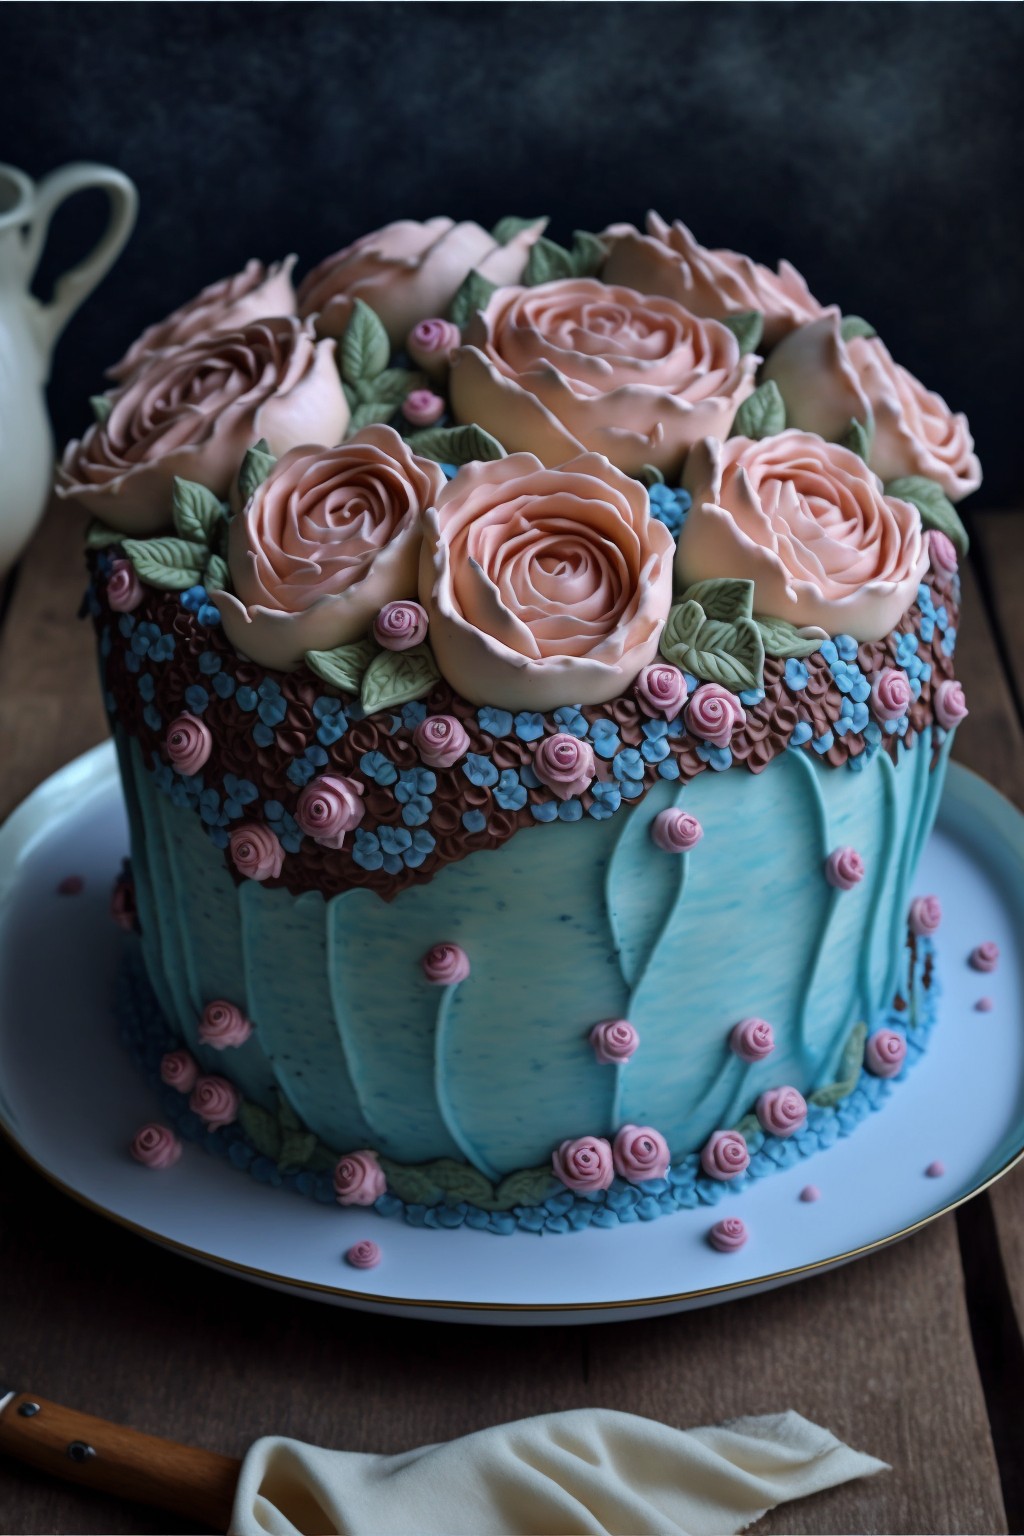 5 images of rose cake for you by Midjourney